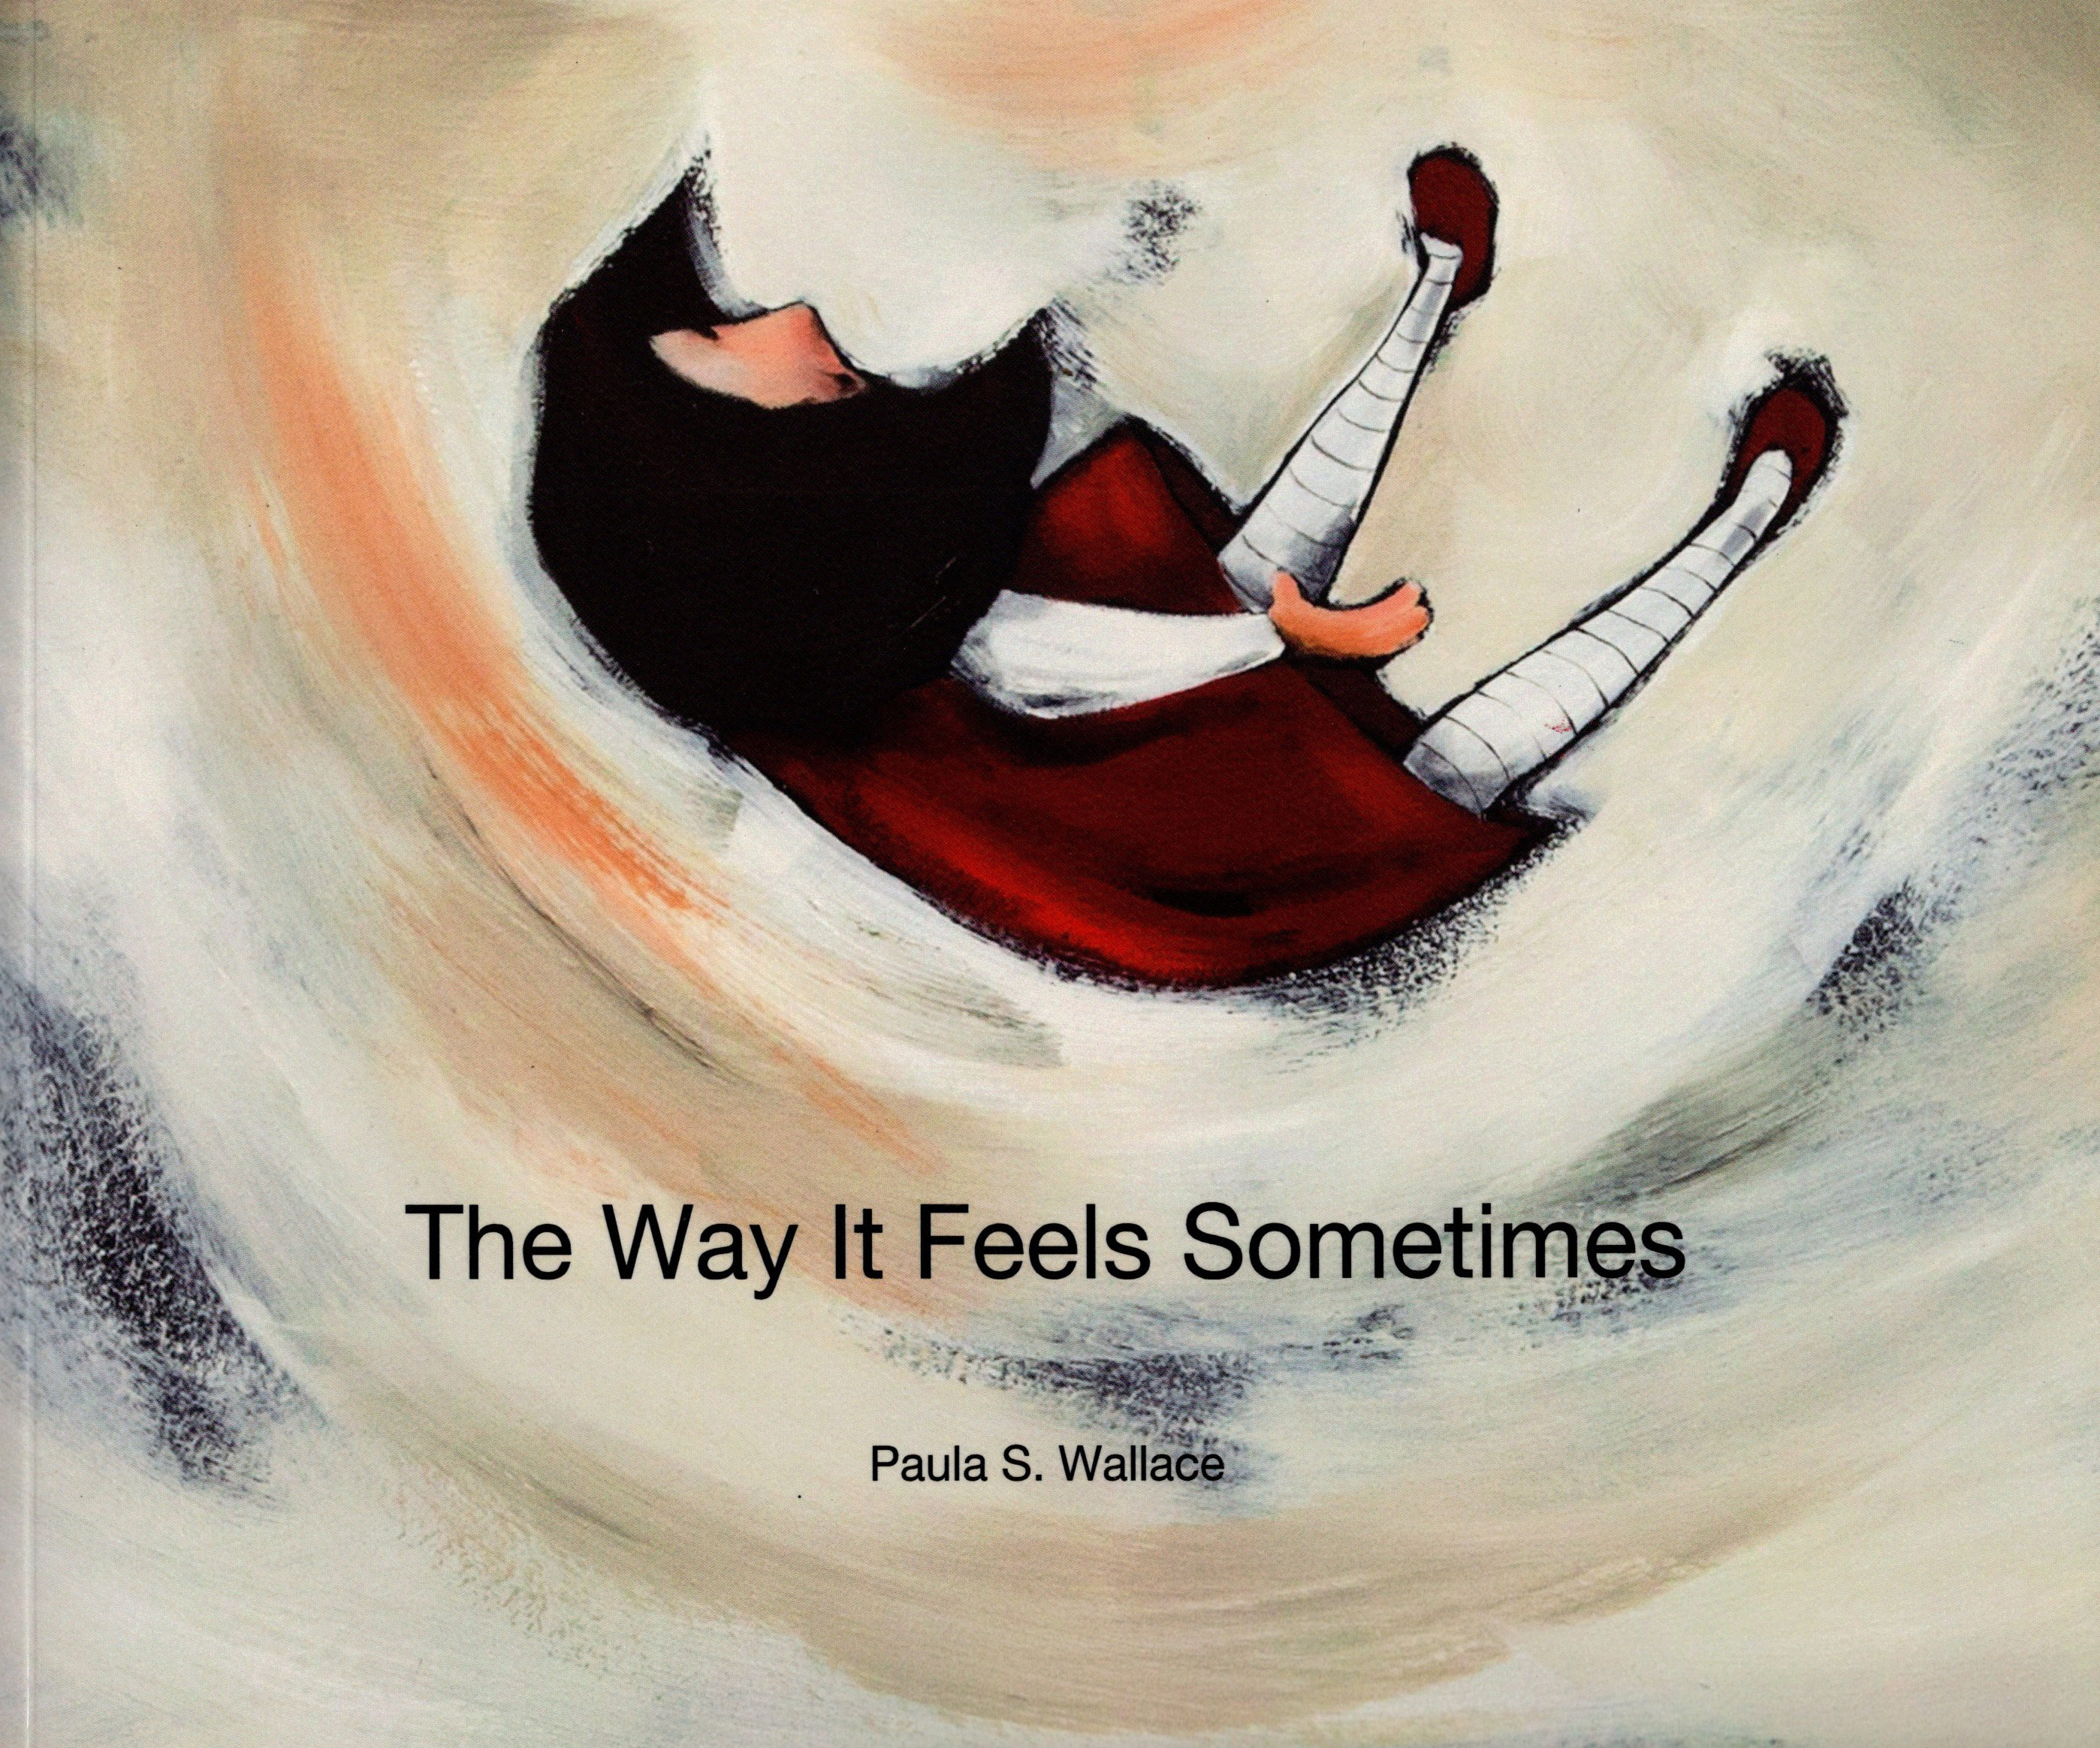 Book the way it feels sometimes kbwfxl